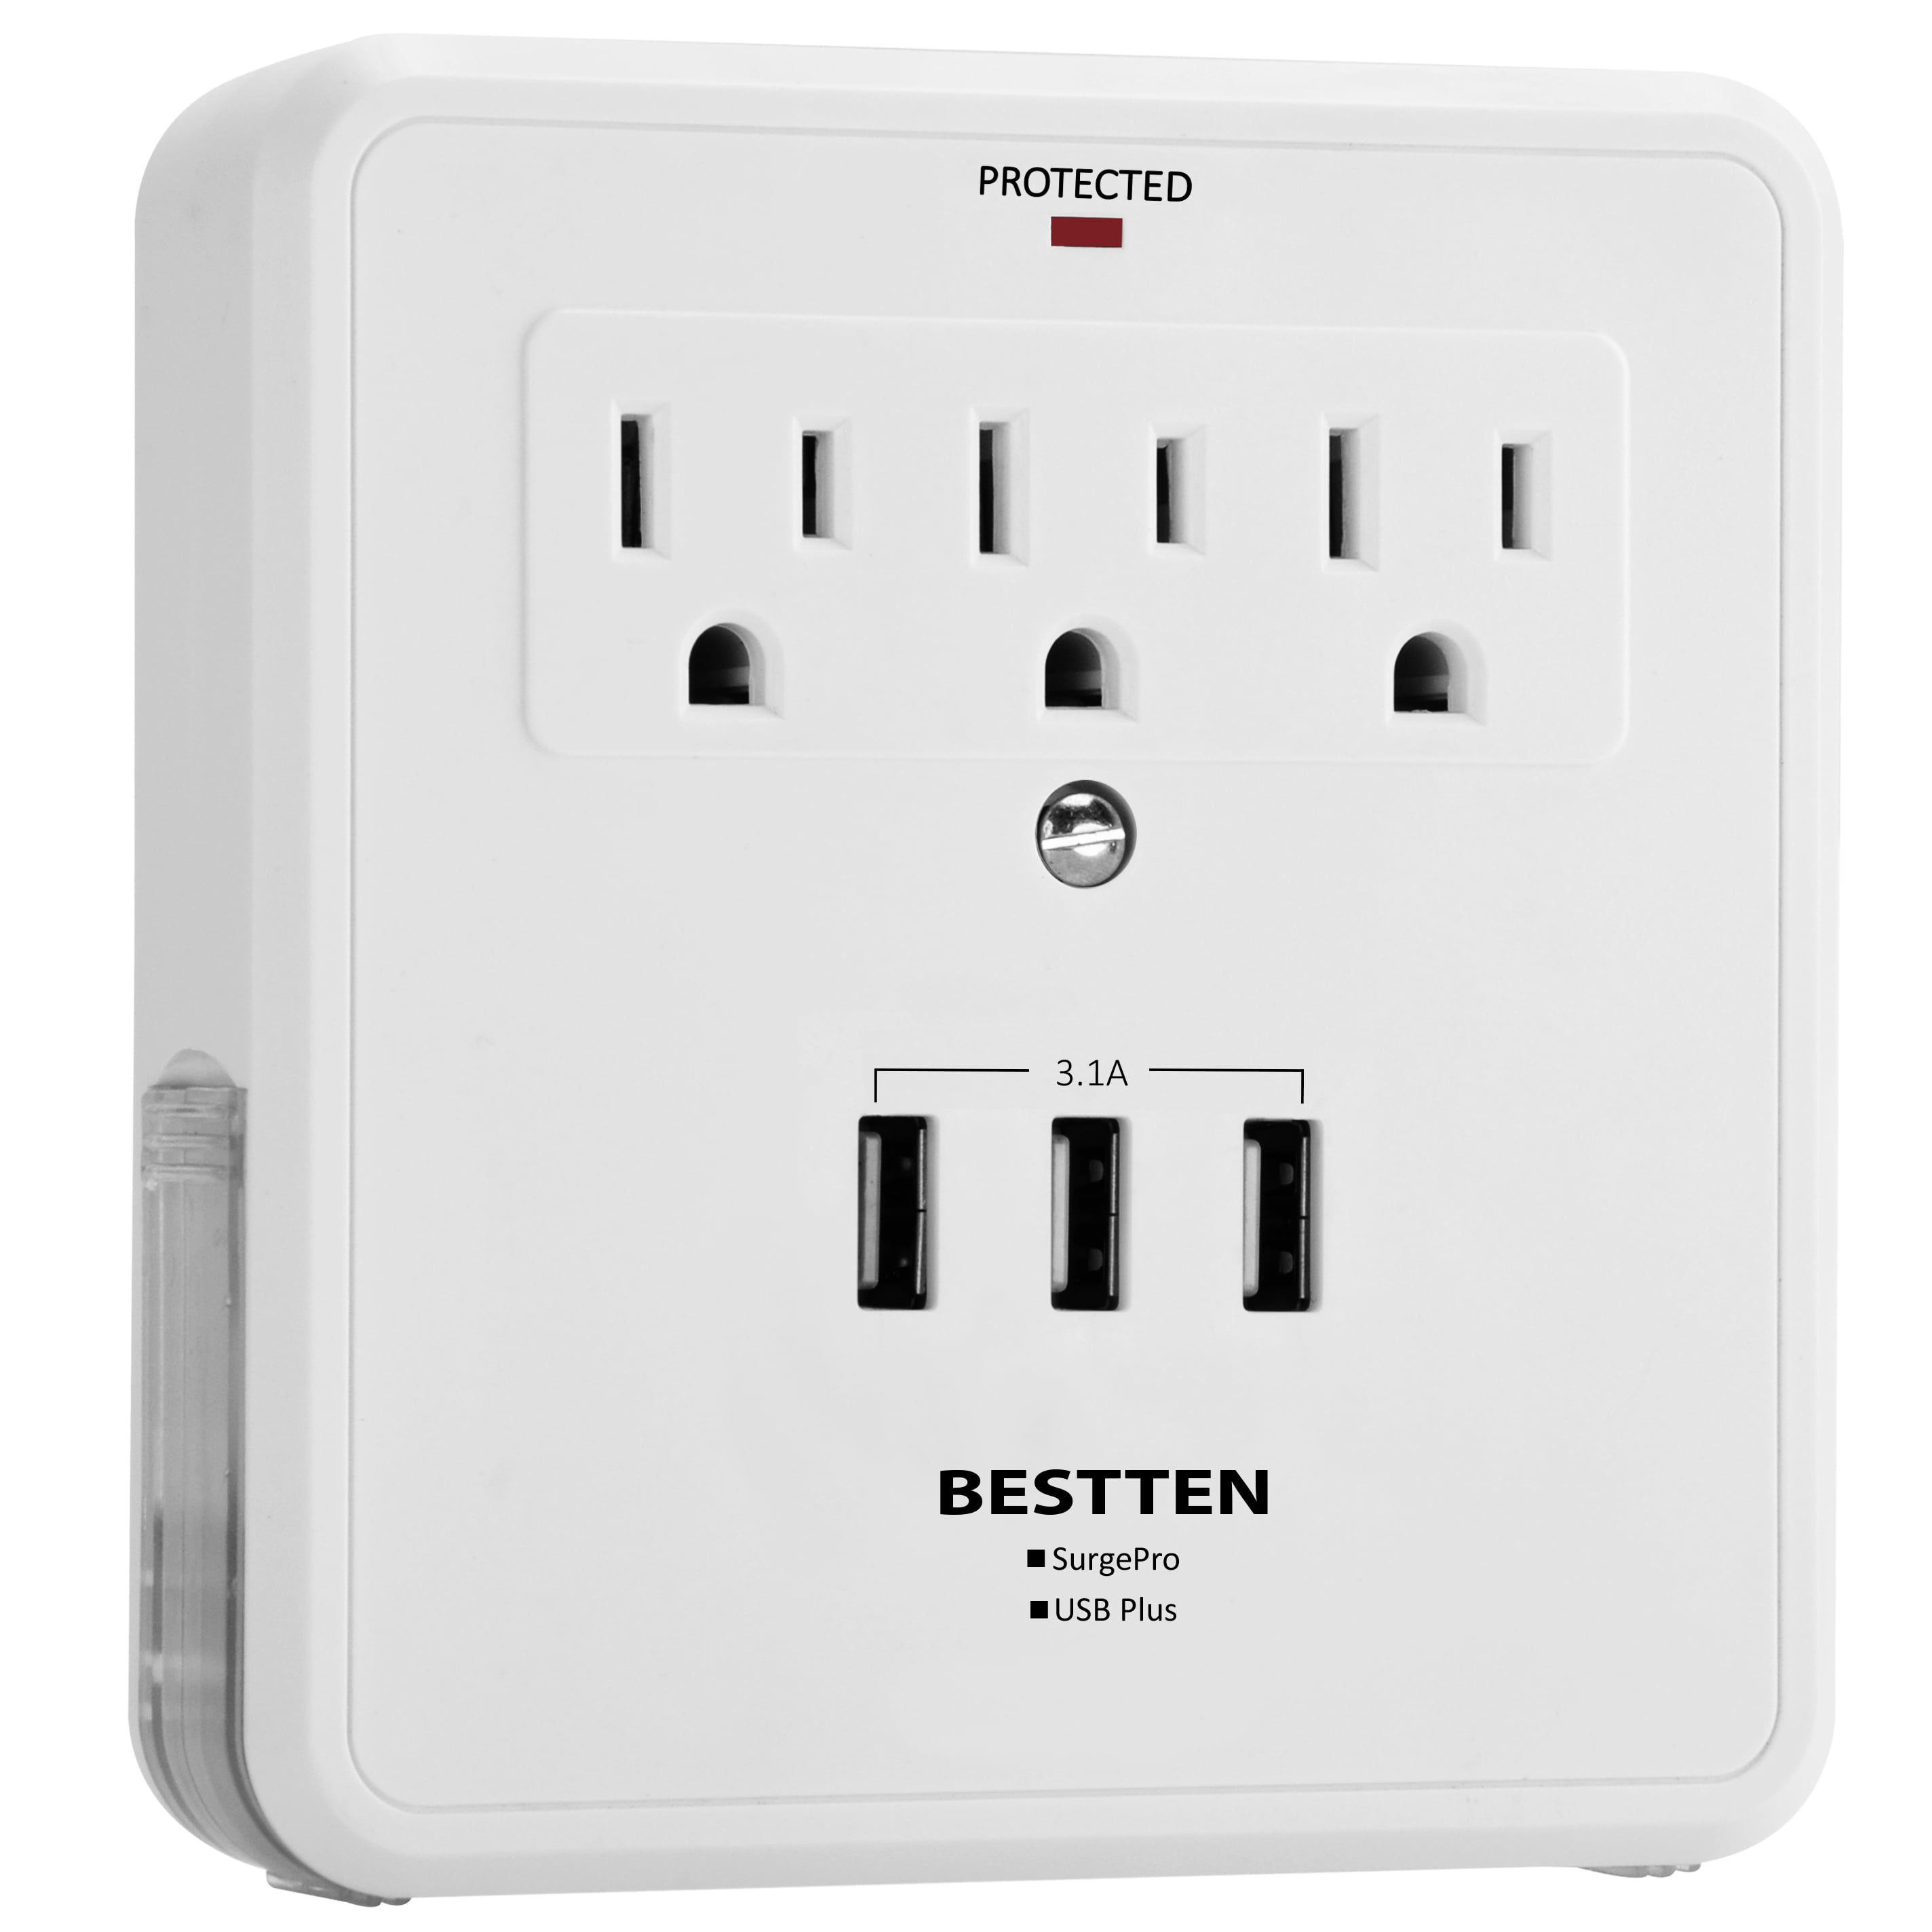 Powrui Multi Wall Outlet Adapter Surge Protector 1680 Joules With 4 USB Mount 3 for sale online 